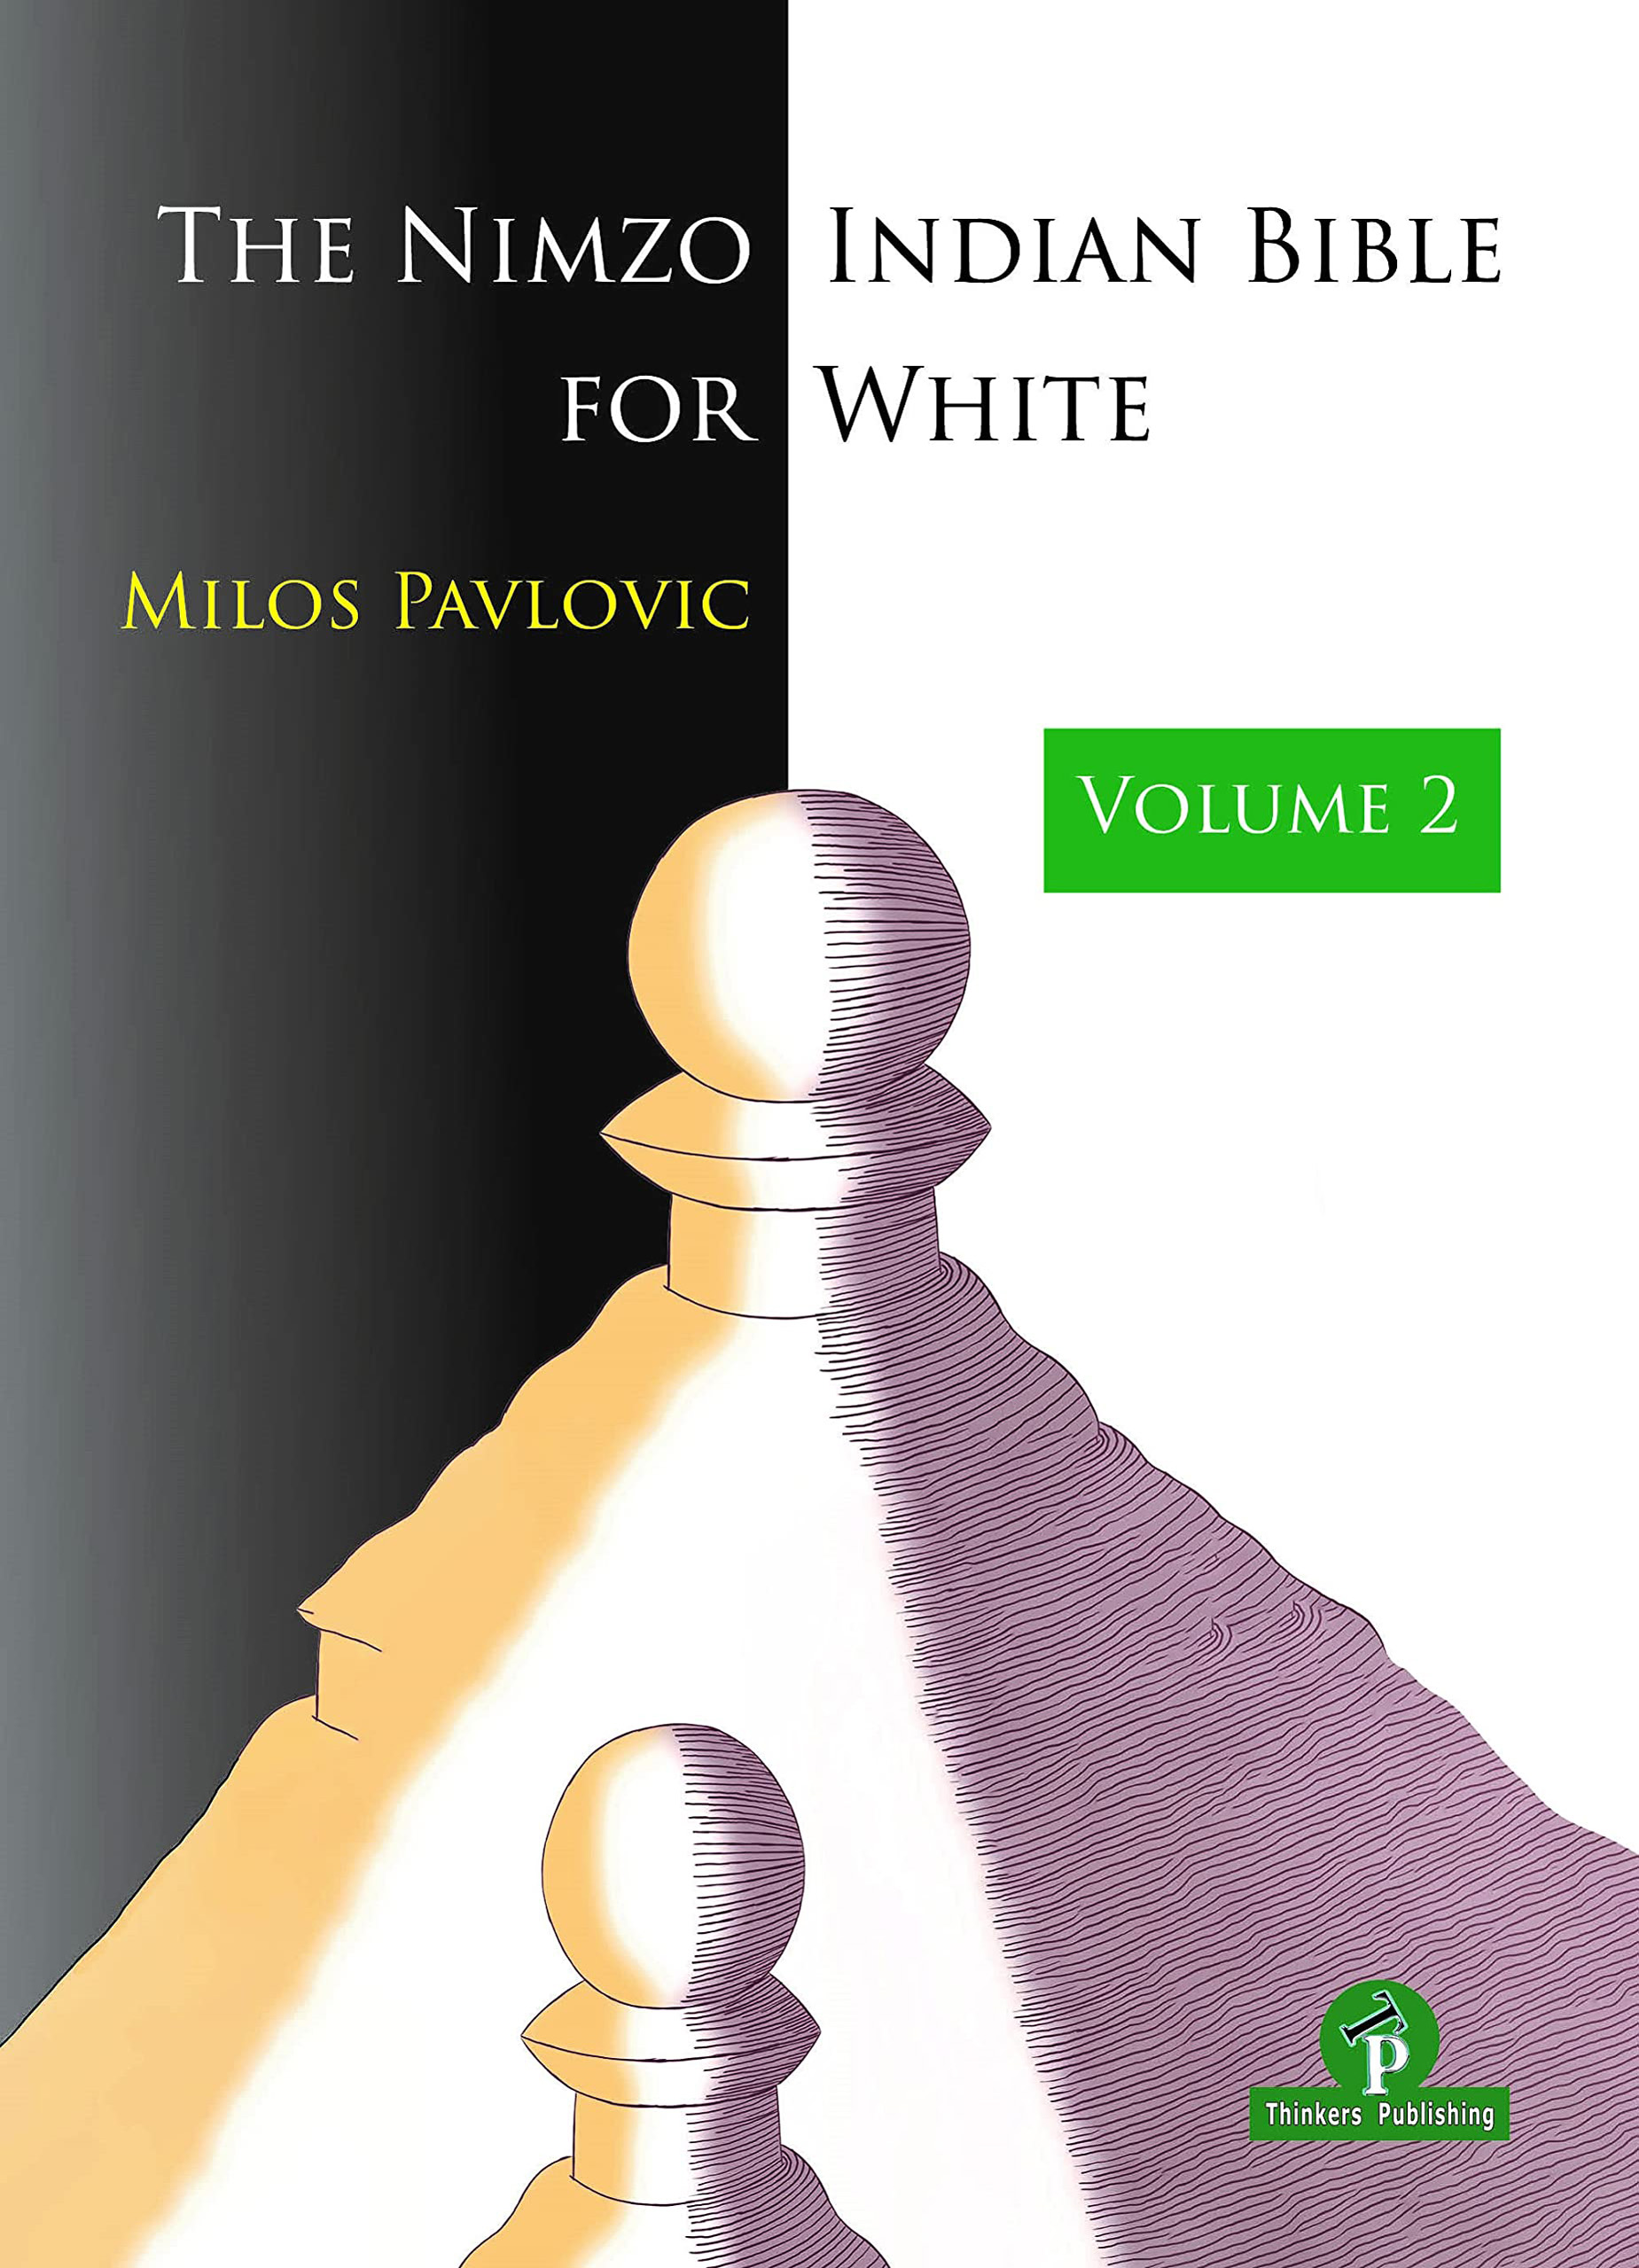 The Nimzo-Indian Bible for White Volume 2